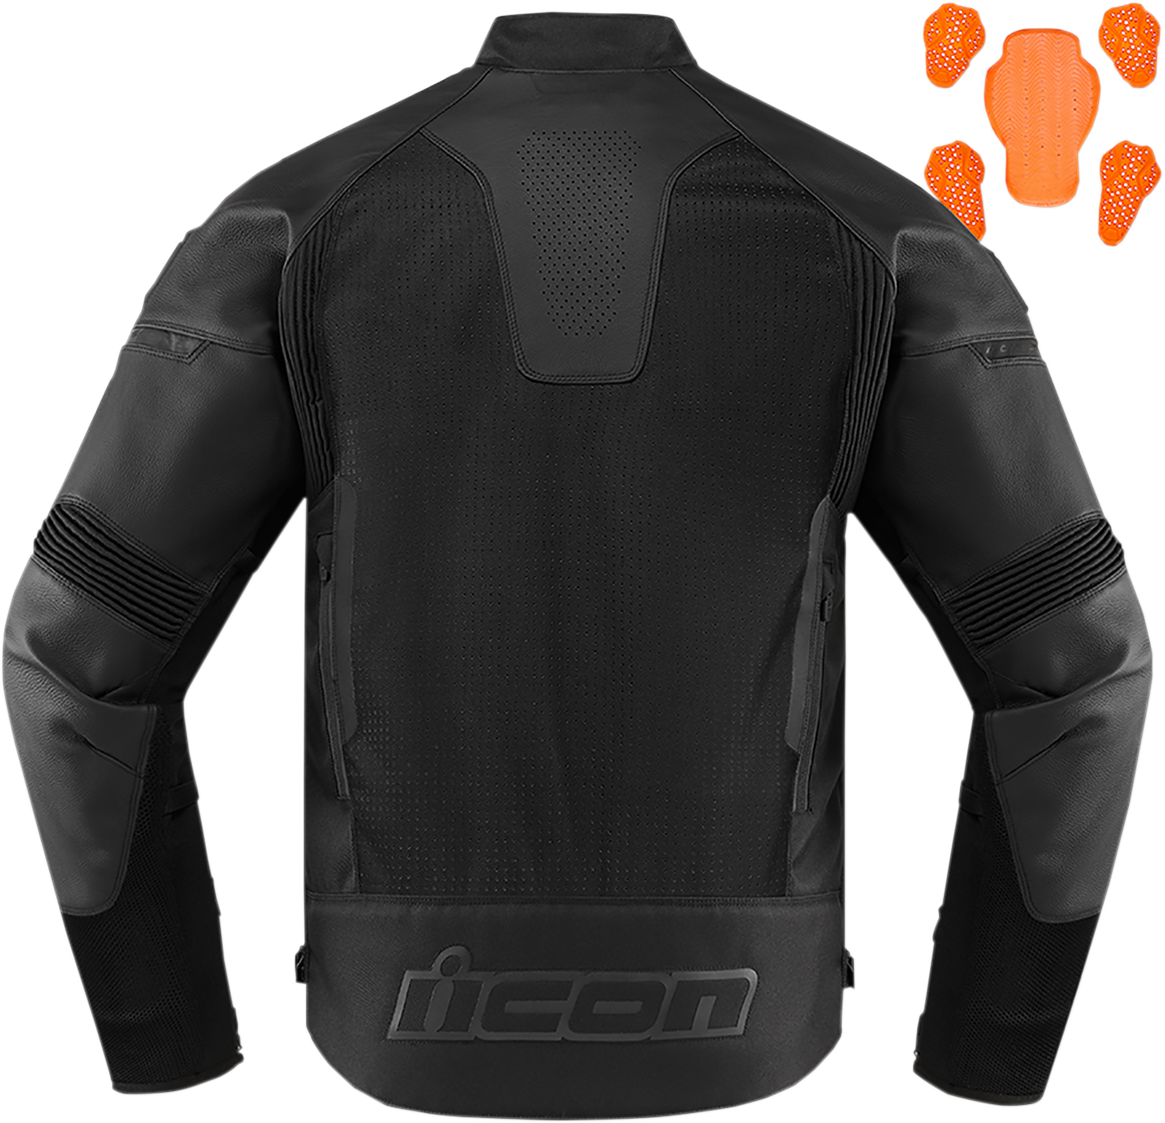 ICON Contra2 Perf CE Jacket - Stealth - Large 2810-3662